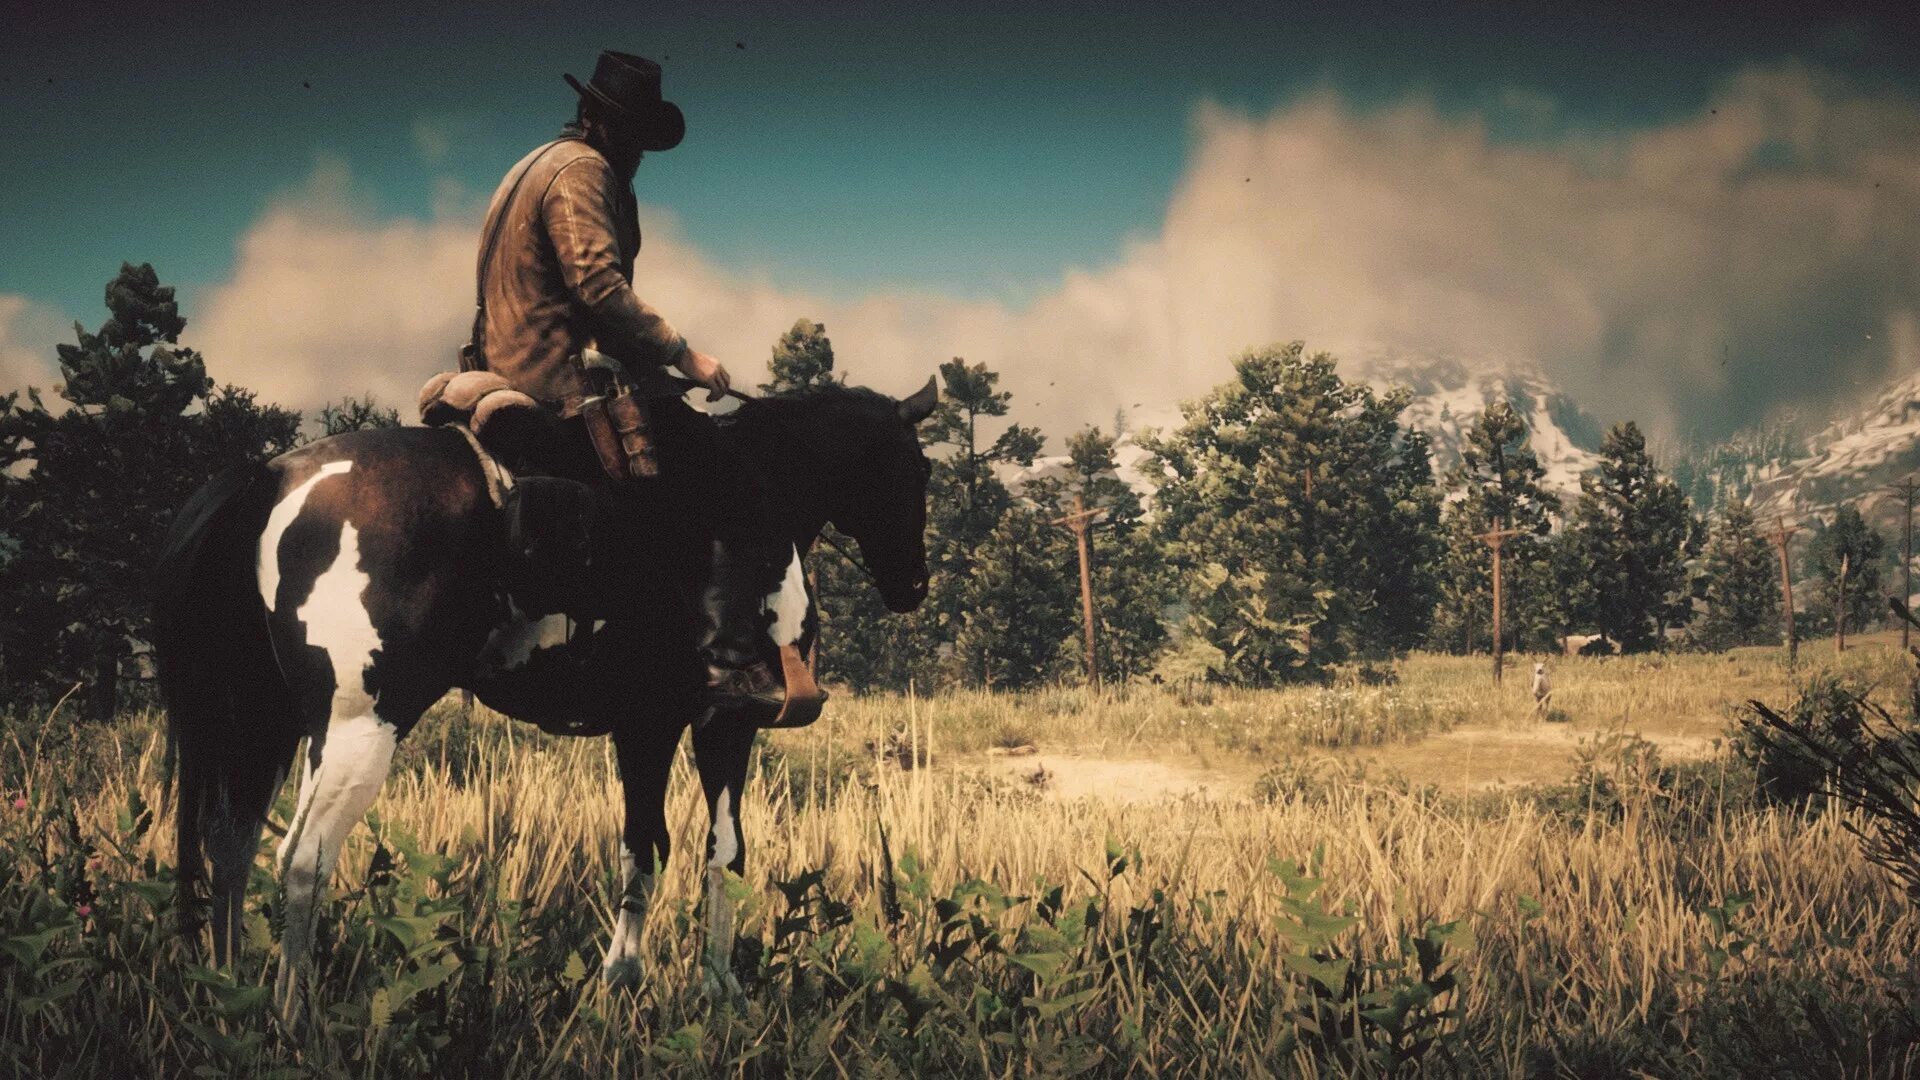 Red dead redemption 2 природа. Red Dead Redemption 2. Red Dead Redemption 2 Скриншоты. Red Dead Redemption 2 rdr2 screenshots. Ред дед редемпшен 2 природа.